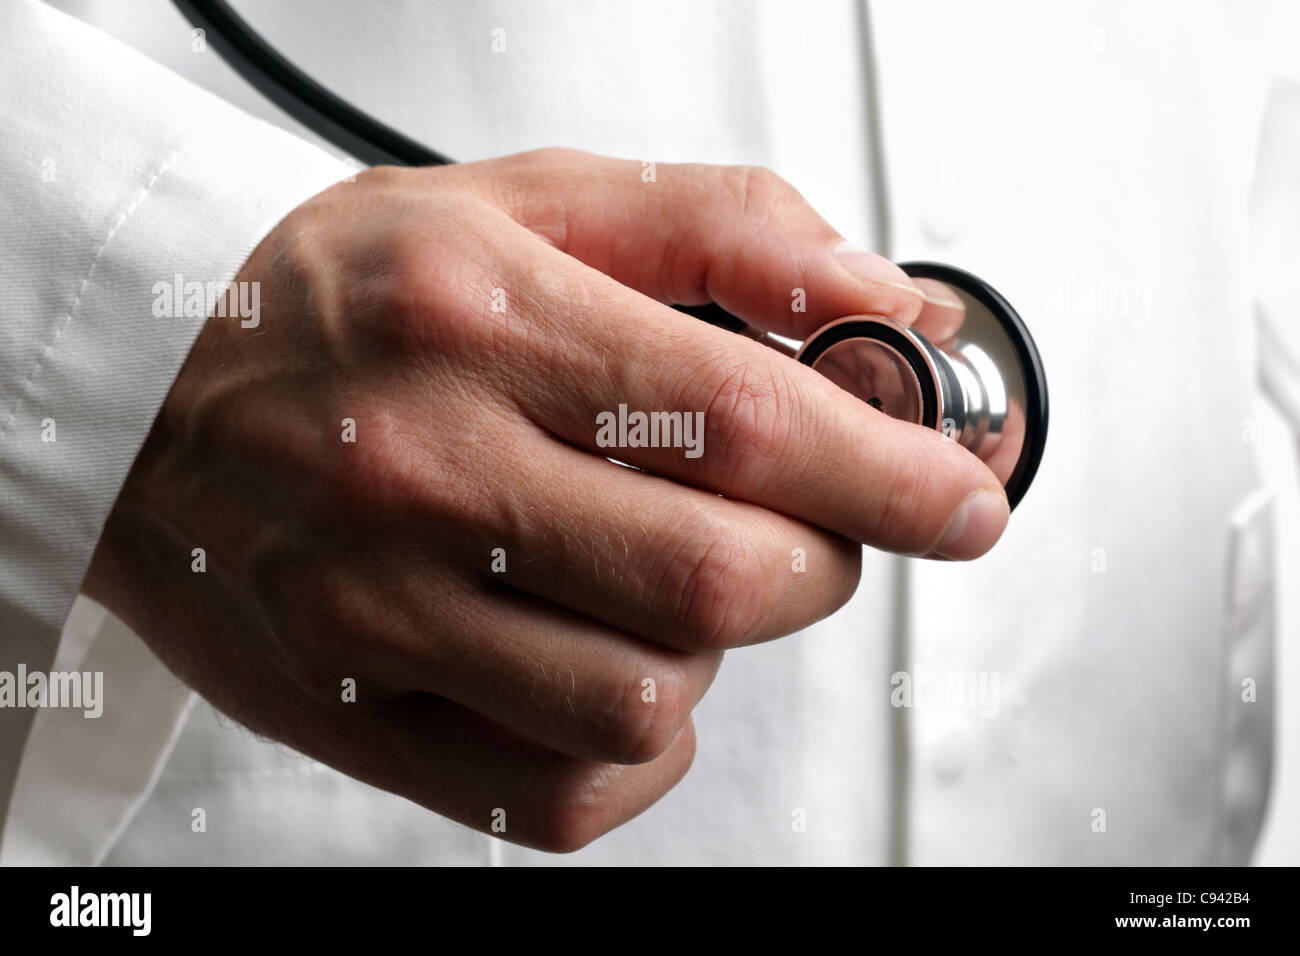 Doctor holding stethoscope Banque D'Images